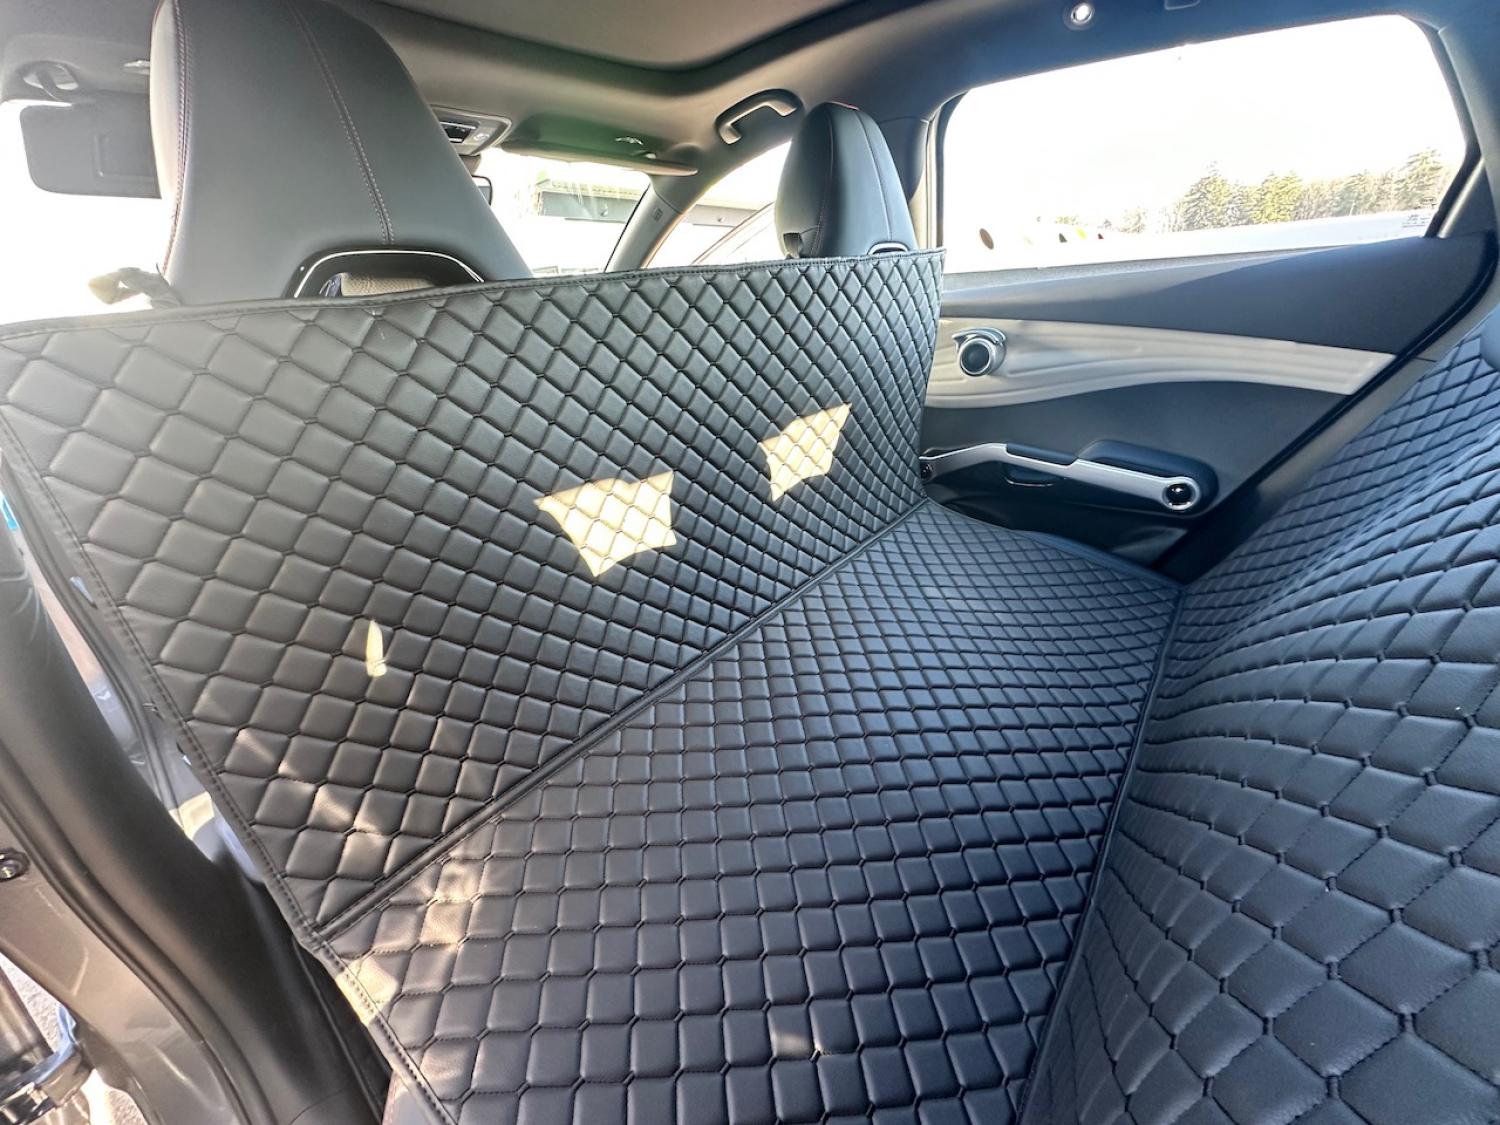 CARSTYLER® Back Seat Cover Geeignet Für Peugeot 5008